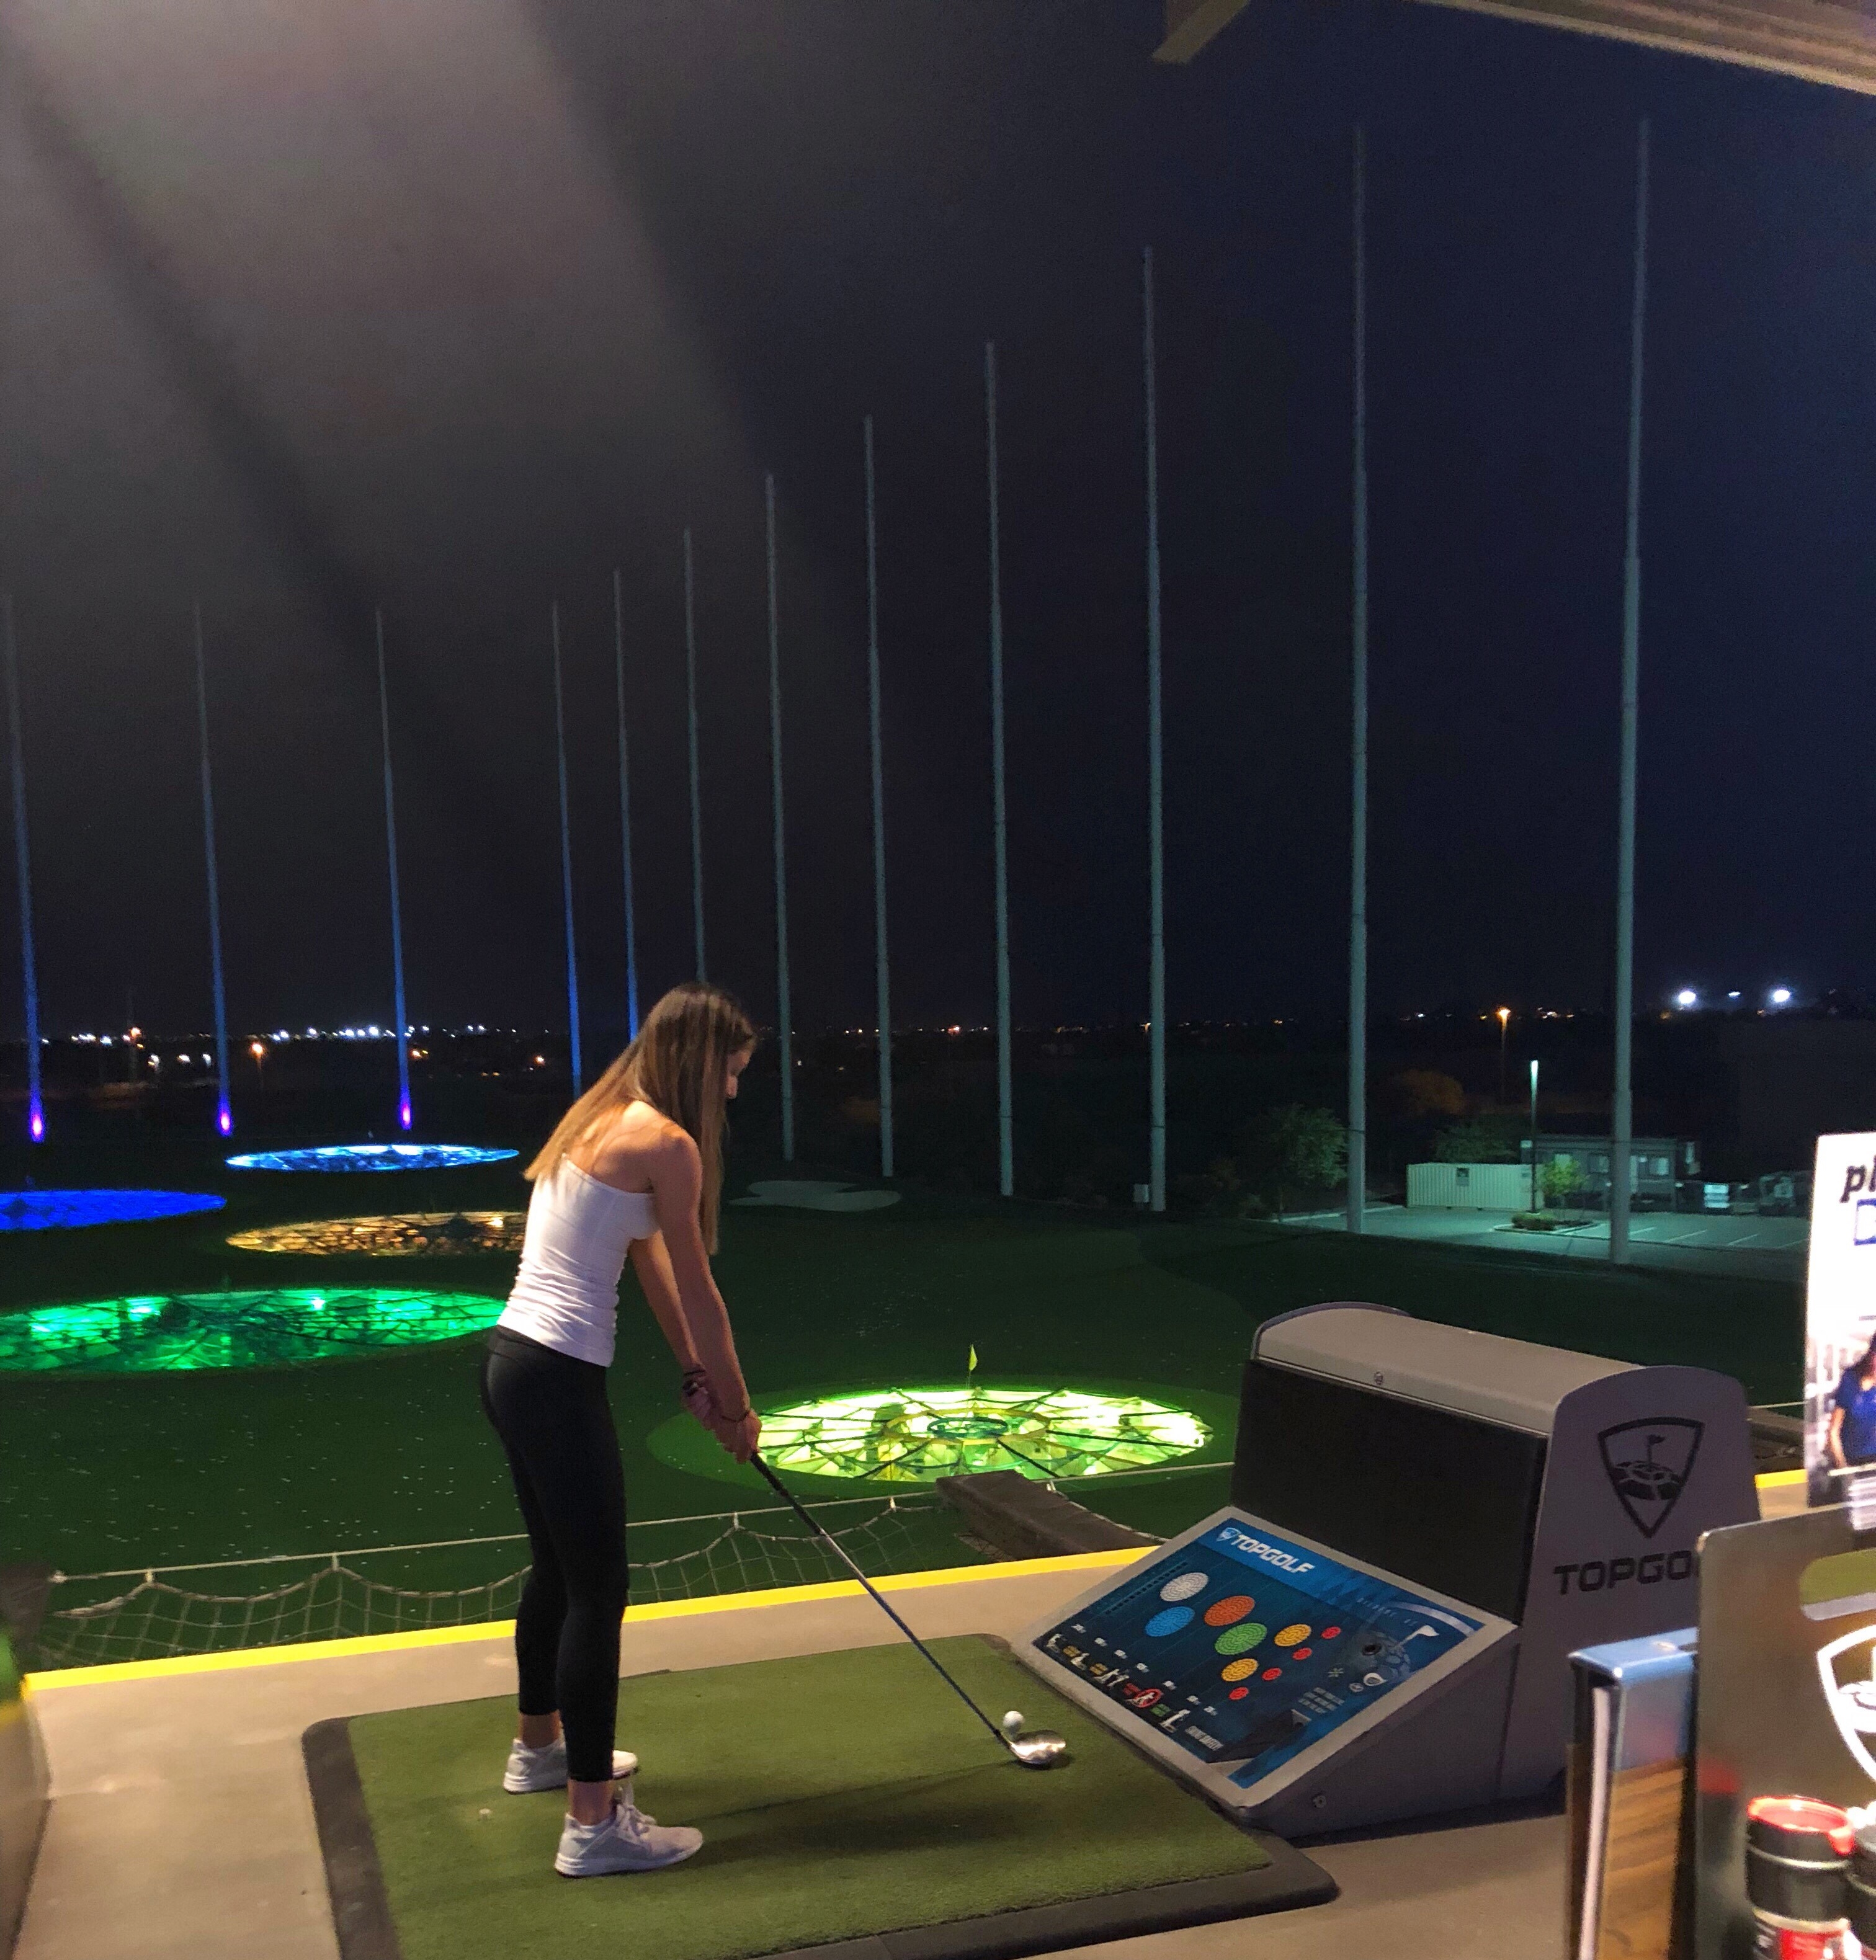 Demie golfing at Top Golf